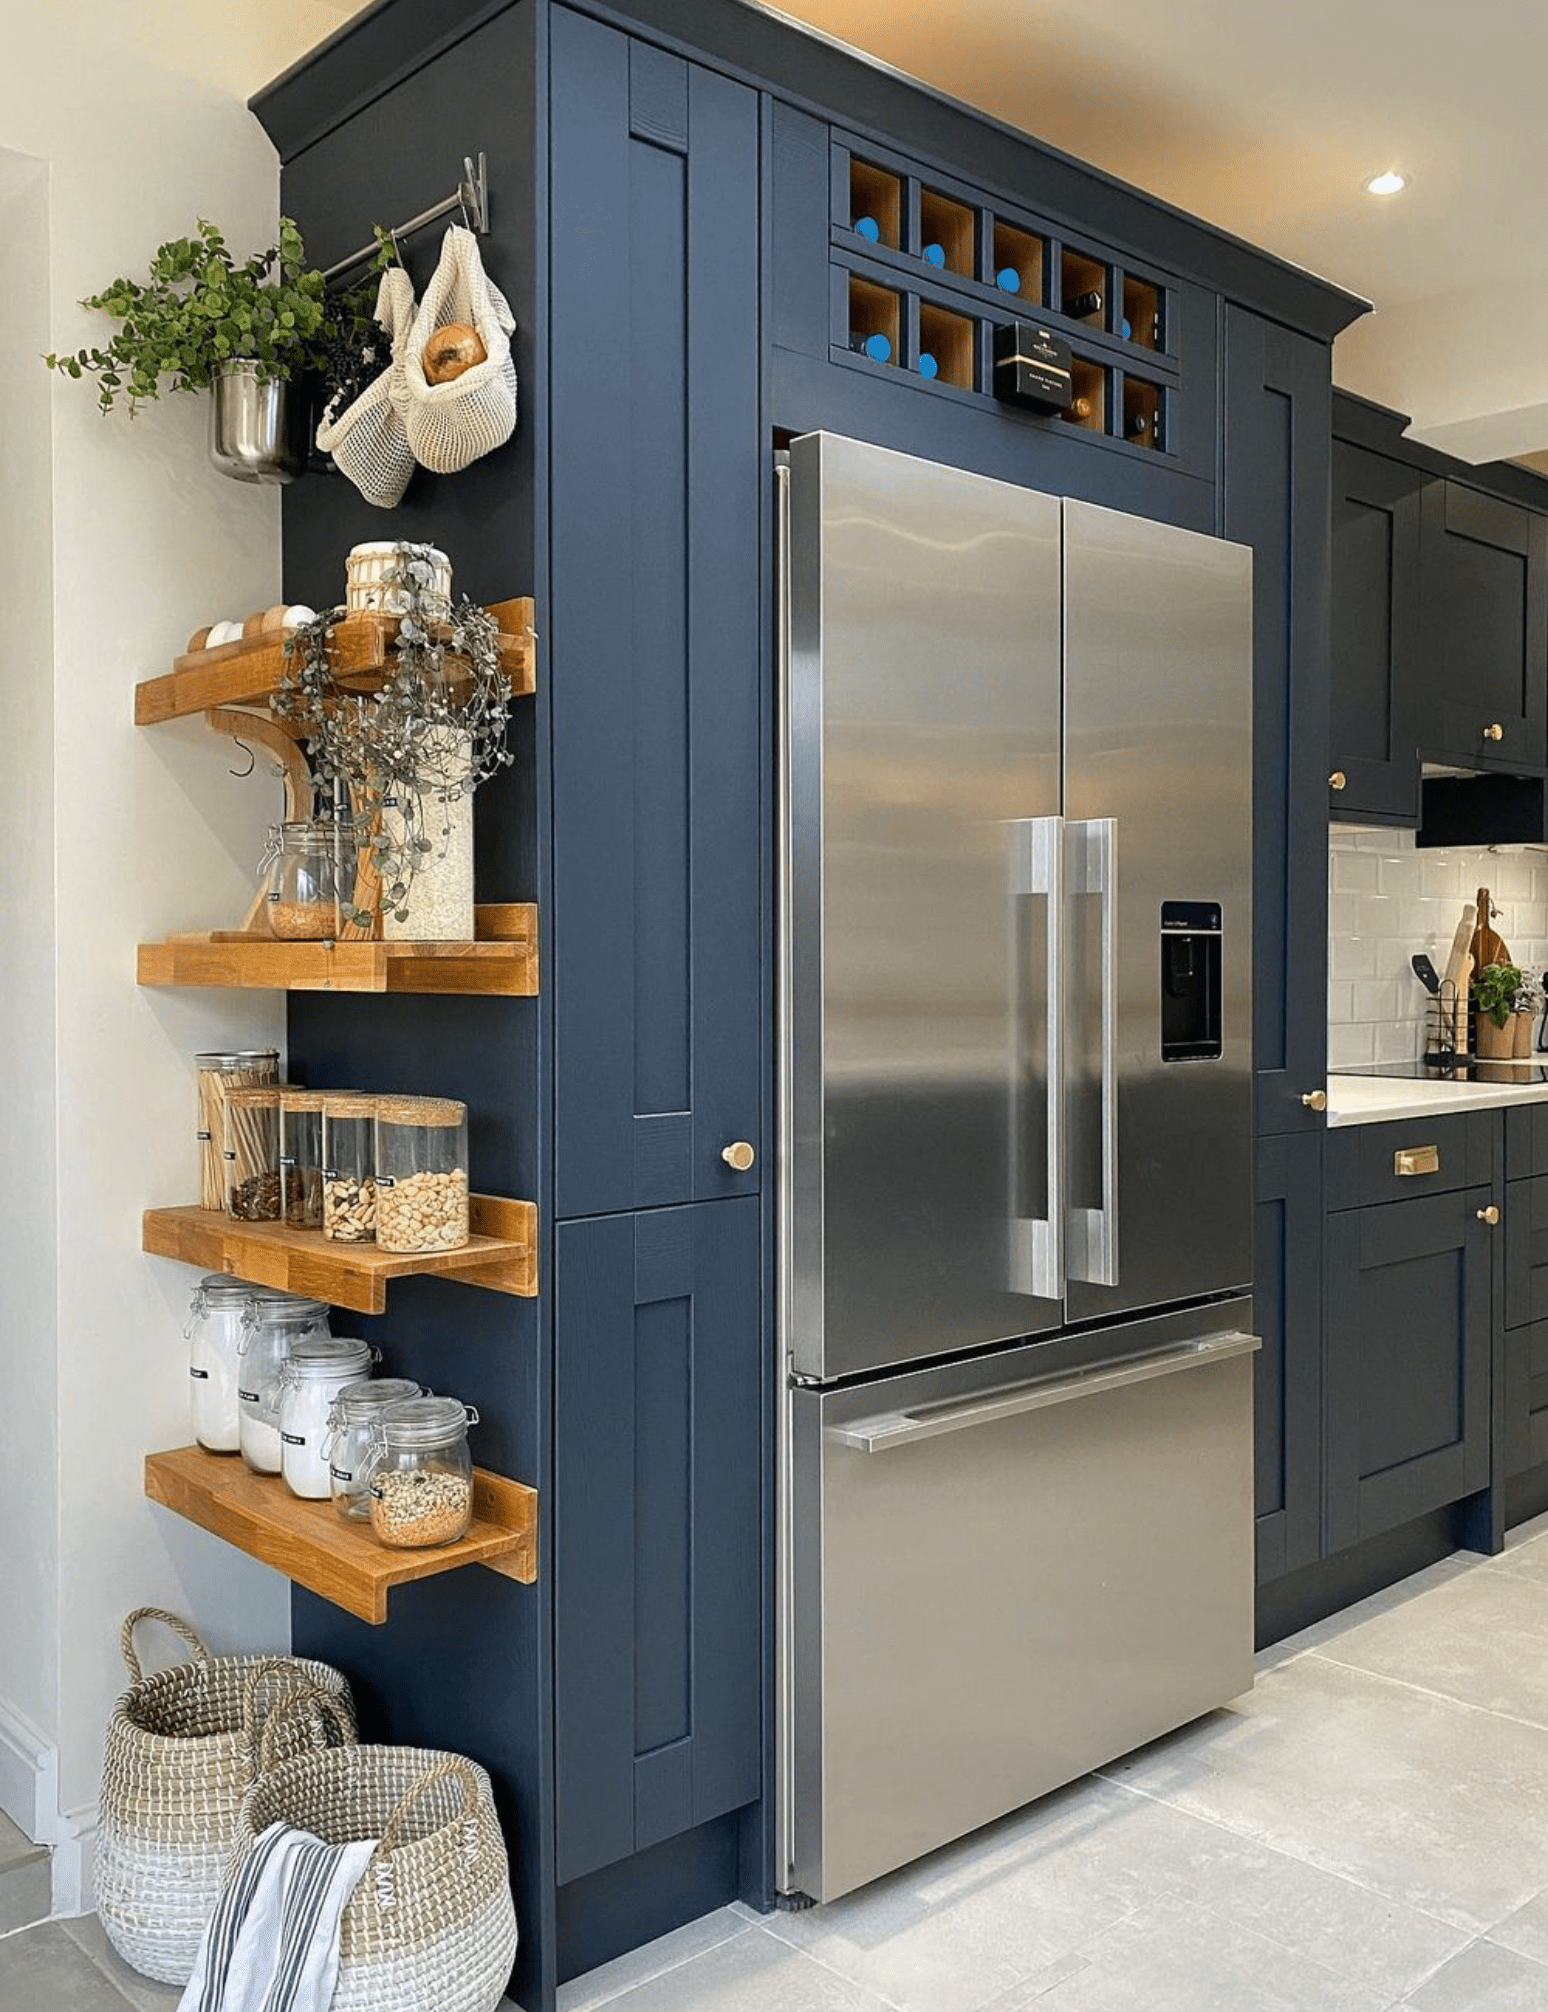 5 Tips For Organizing Your Kitchen Storage